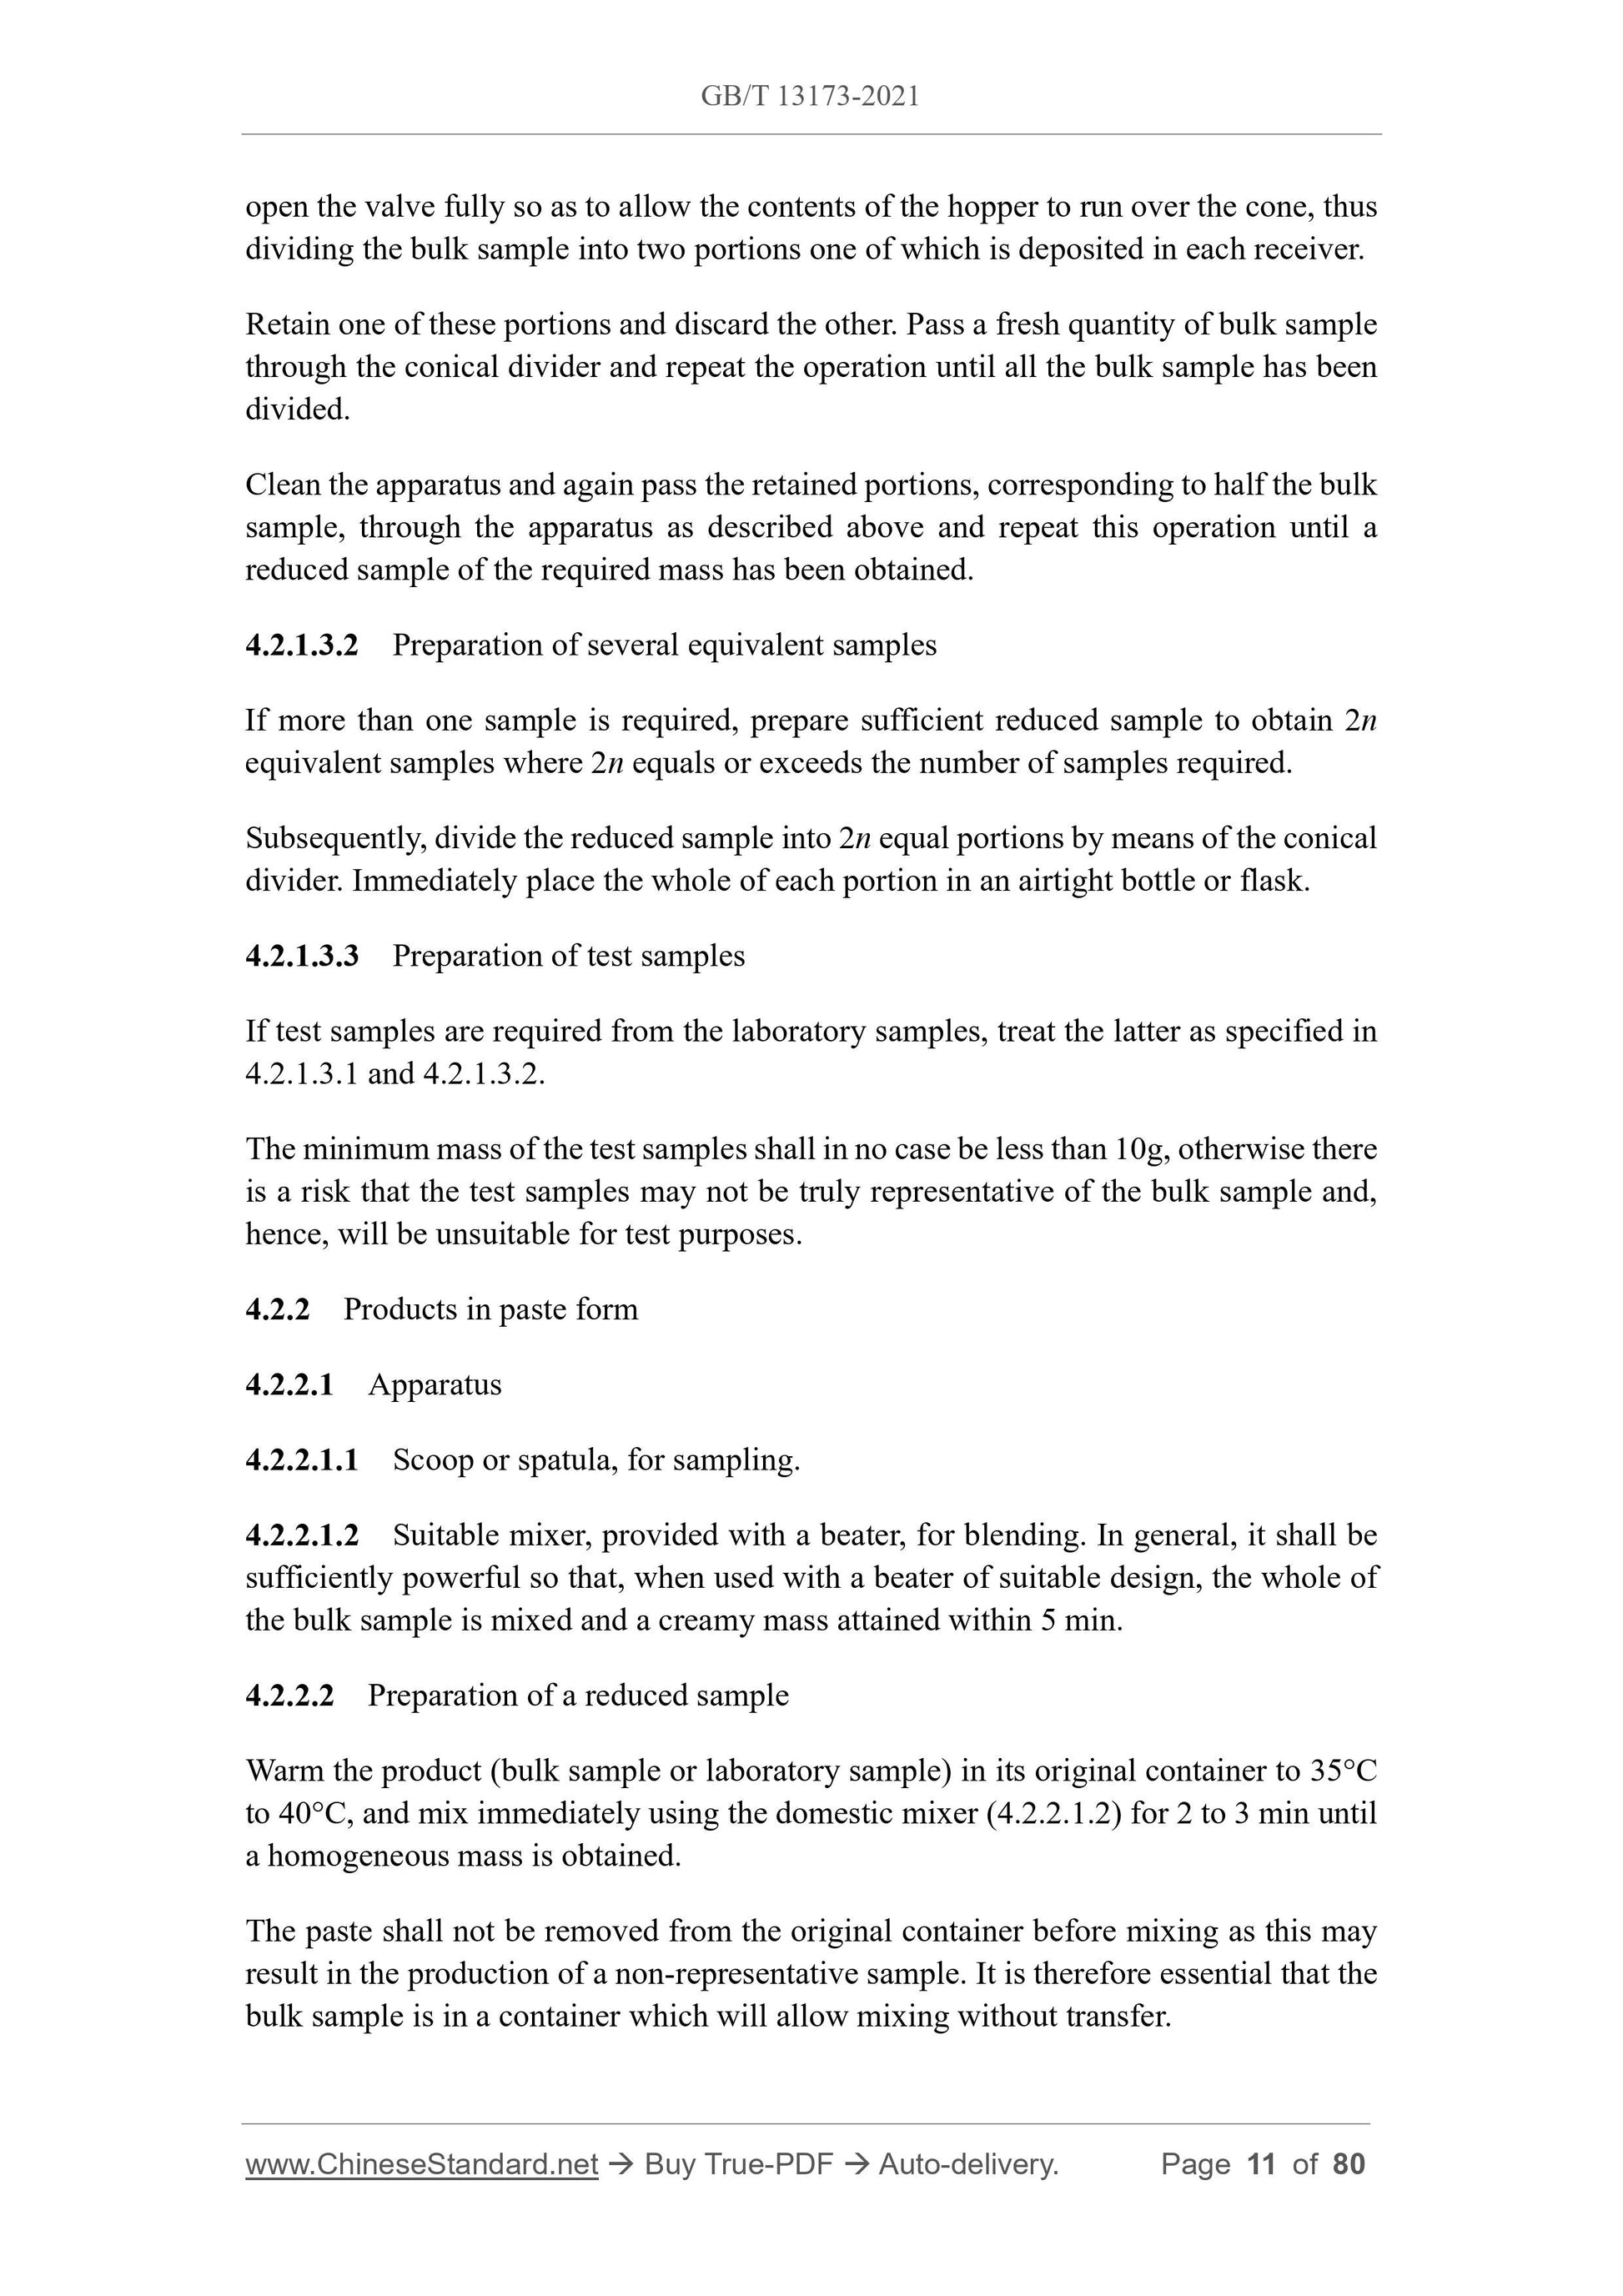 GB/T 13173-2021 Page 4